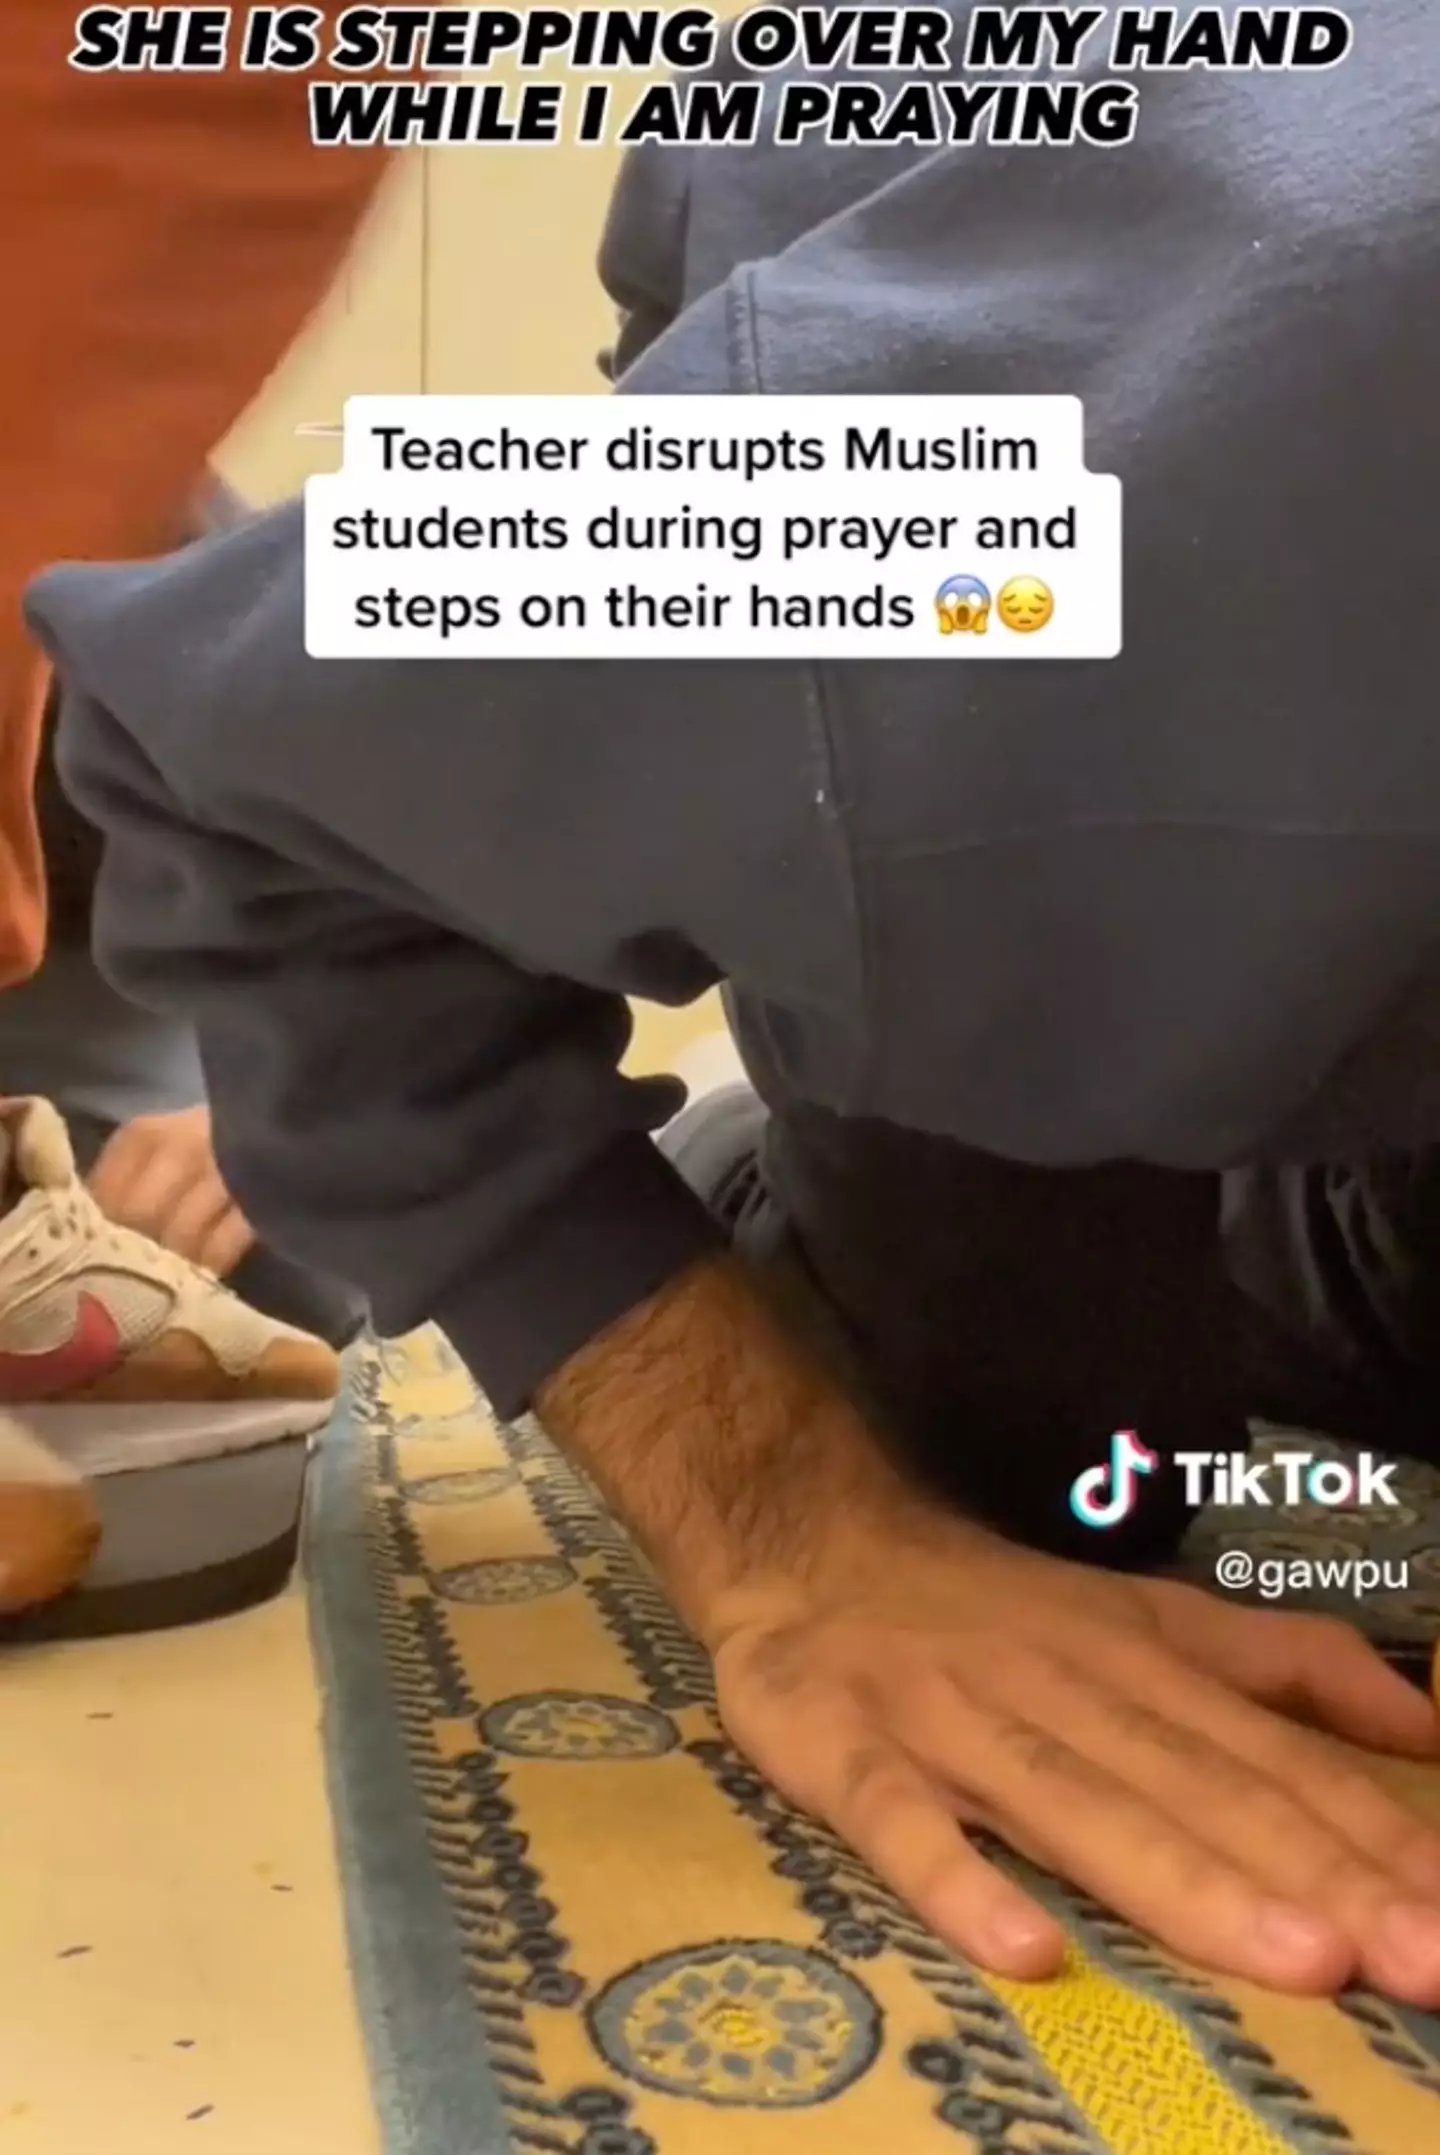 The teacher appeared to step over the students.